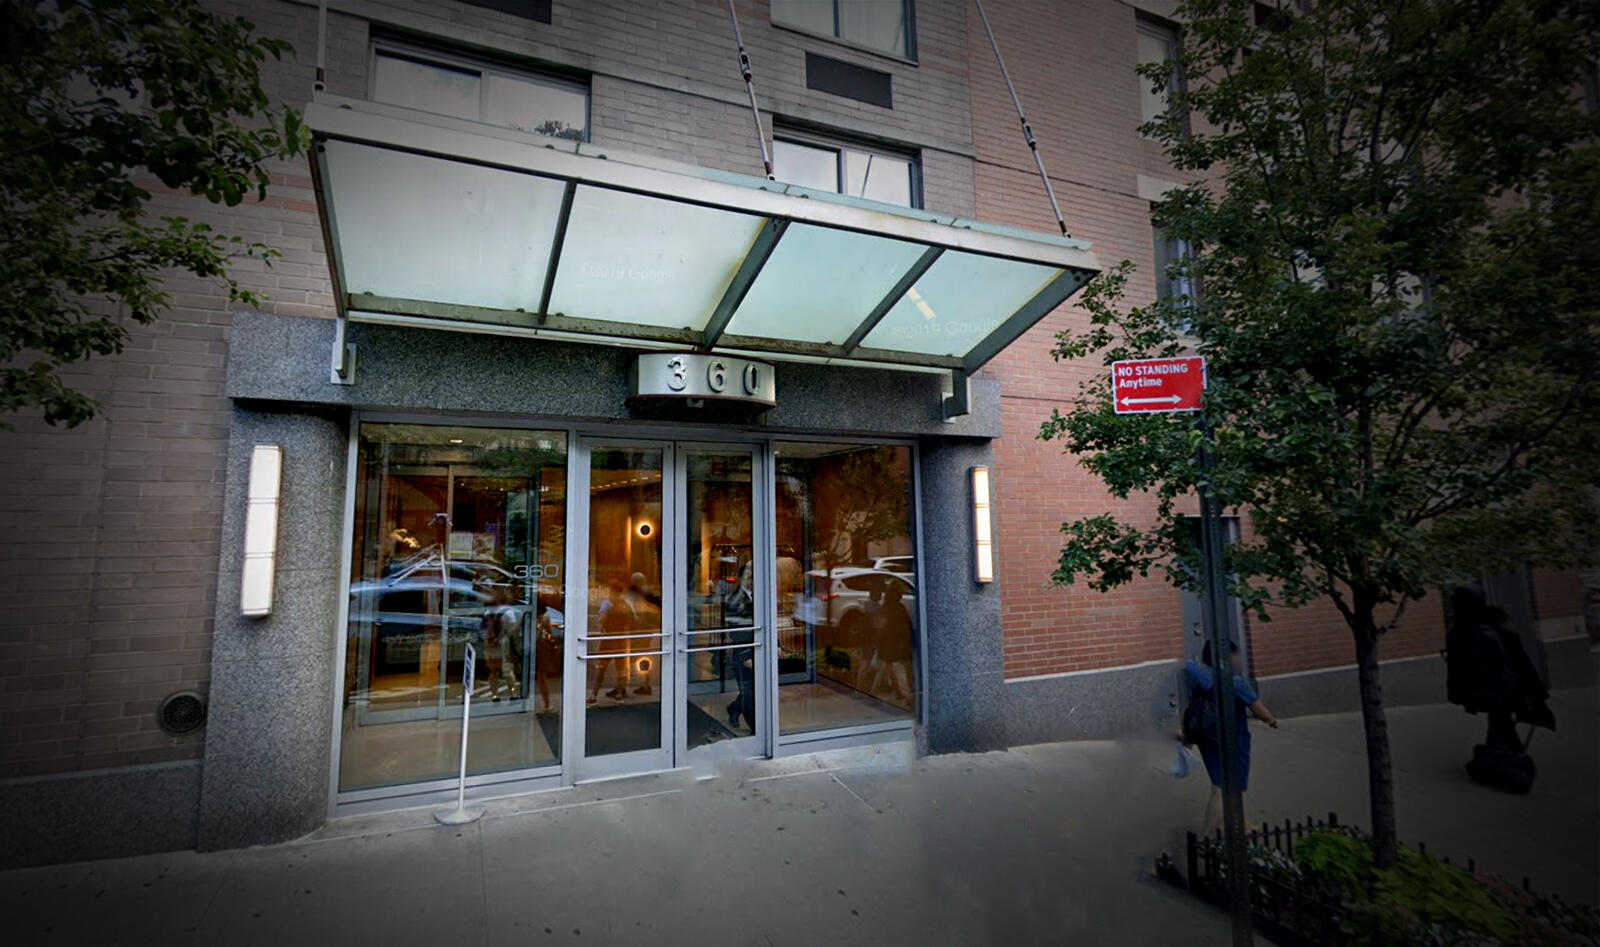 The site of the attack at 360 West 43rd Street (Google Maps)